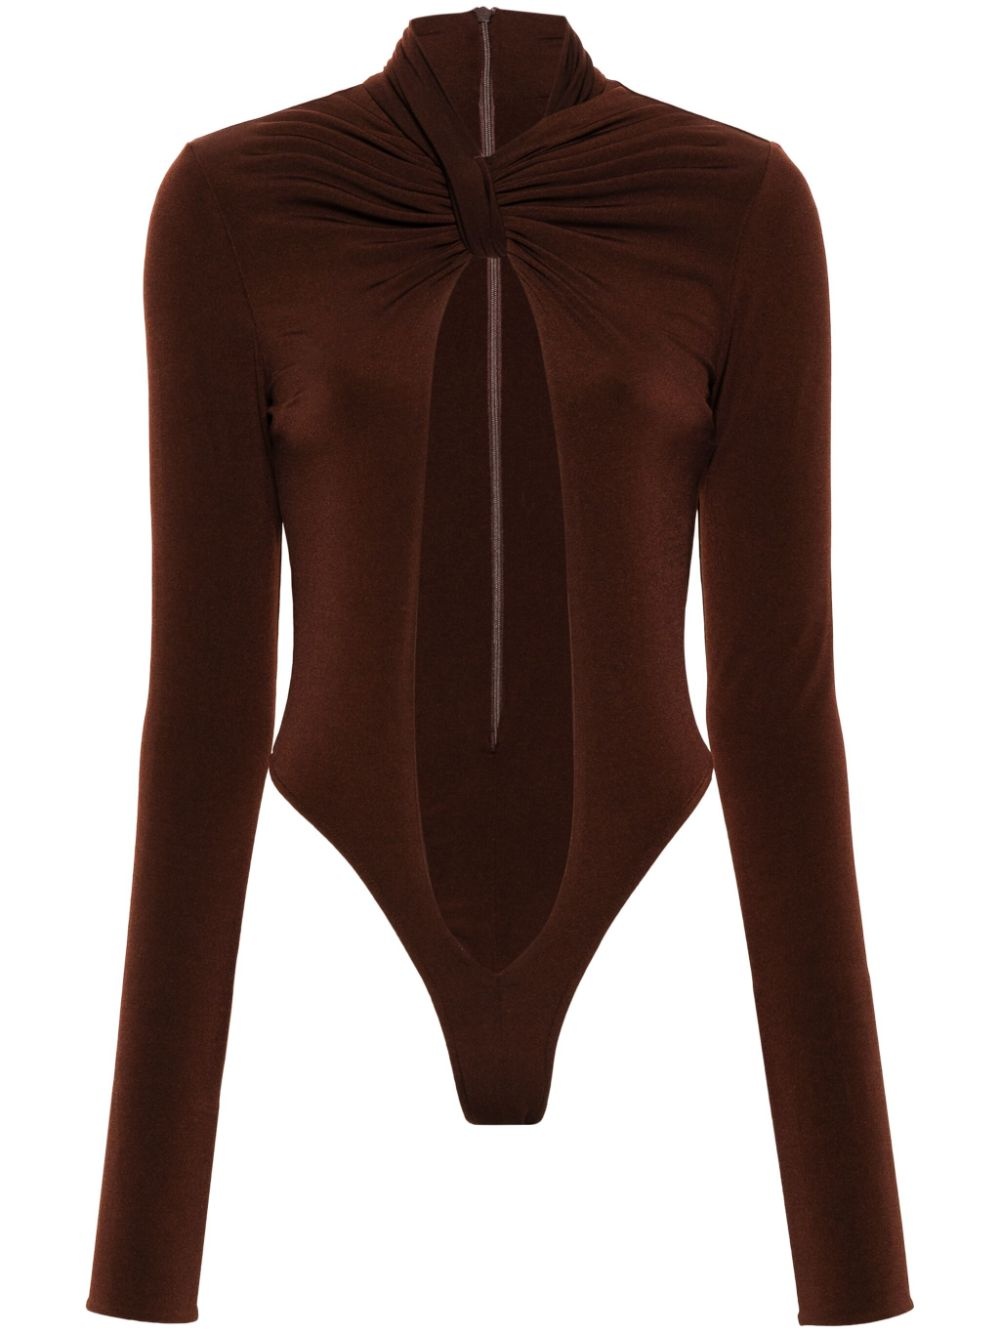 crossover-neck cut-out jersey bodysuit - 1